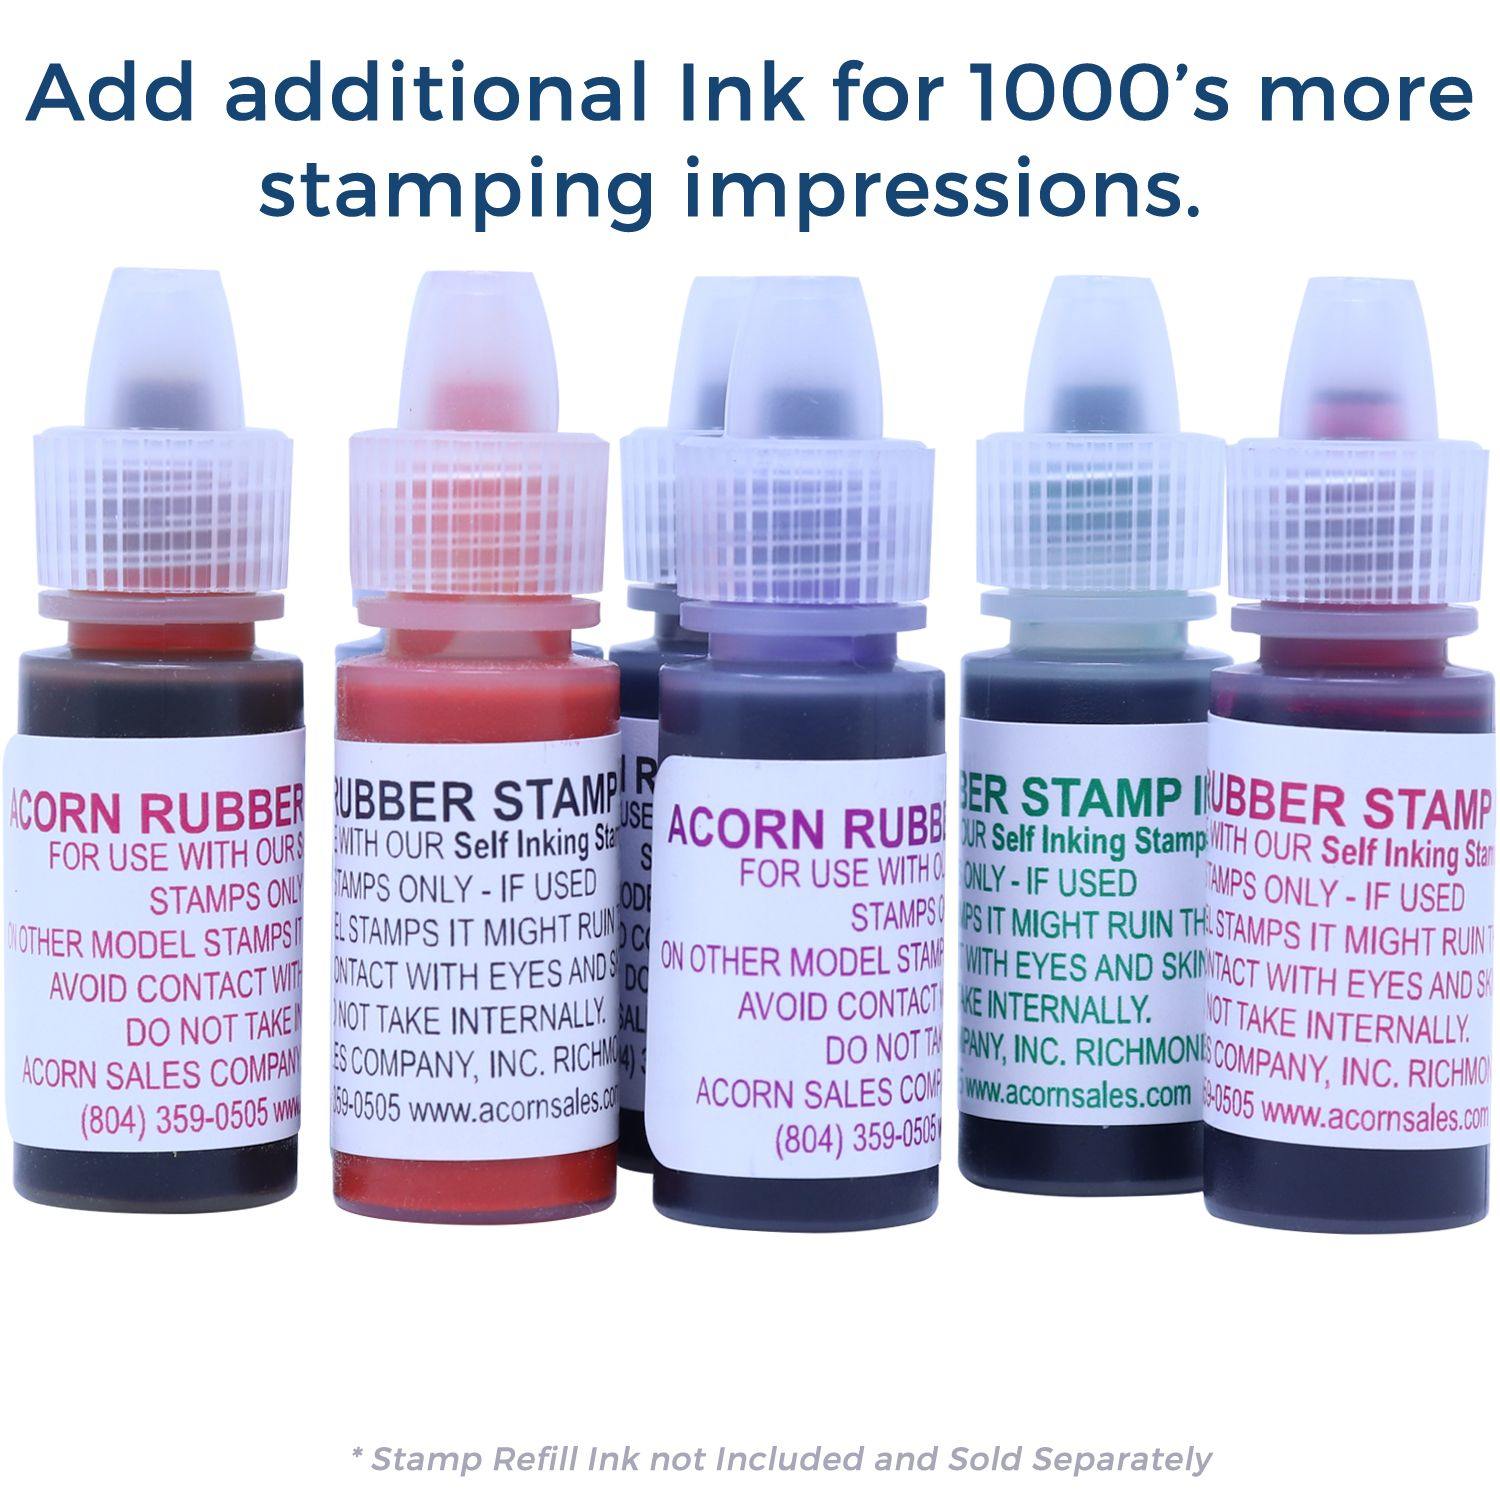 Refill Inks for Slim Pre Inked Plaintiffs Exhibit Stamp Available